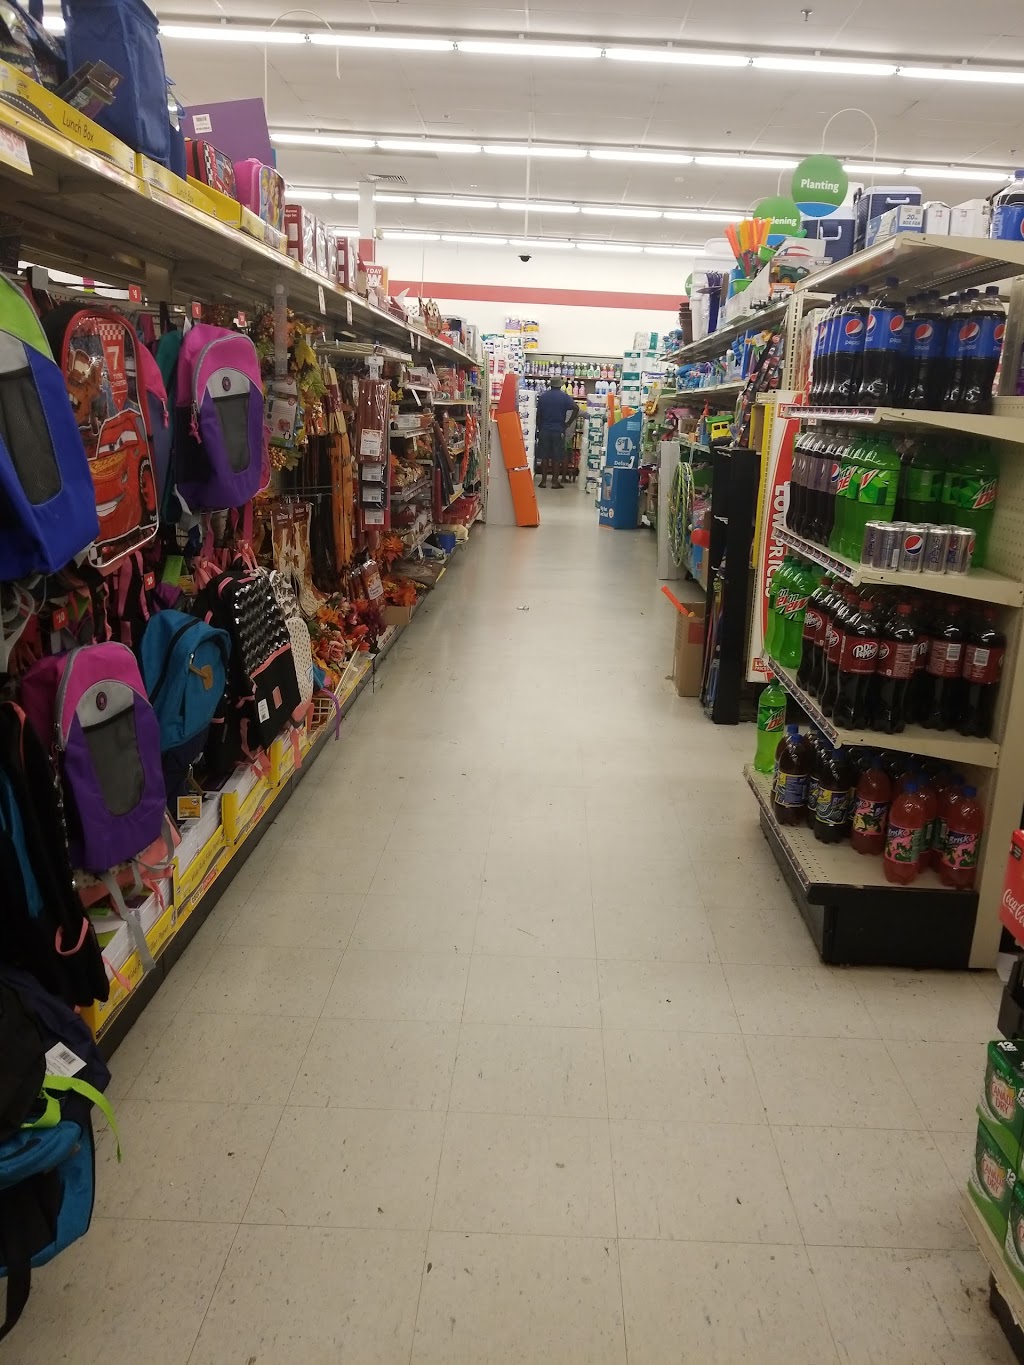 Family Dollar | 684 Foxon Rd, East Haven, CT 06513 | Phone: (203) 974-4436